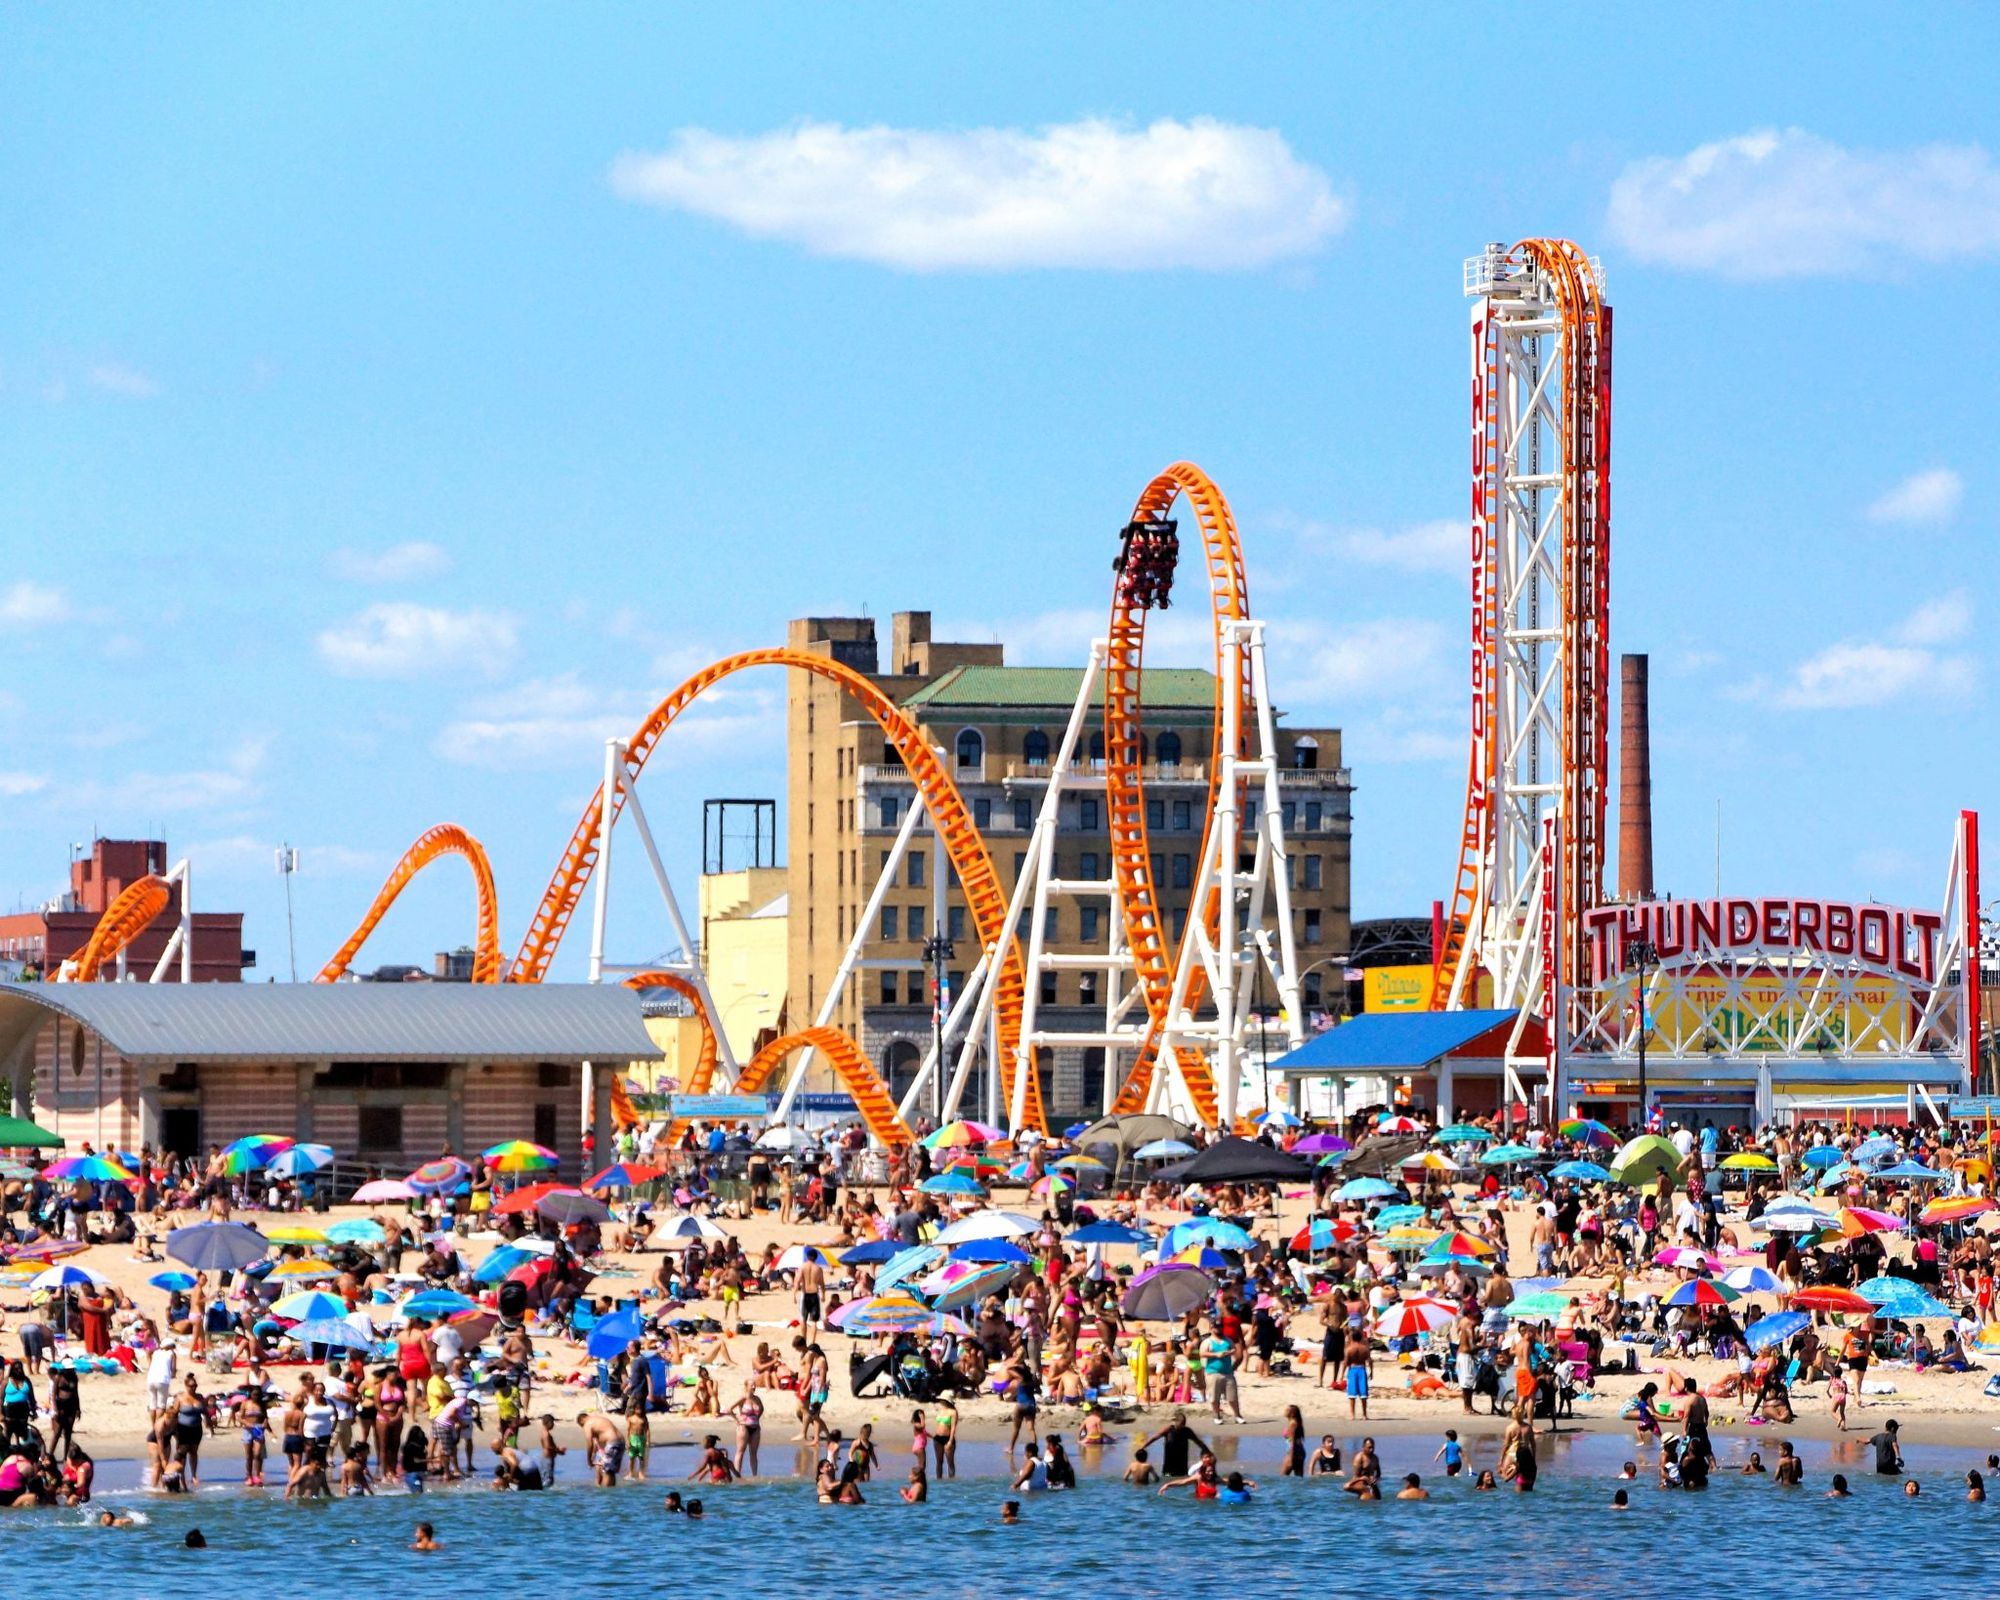 Councilmembers Call For Increased Safety on Coney Island Boardwalk